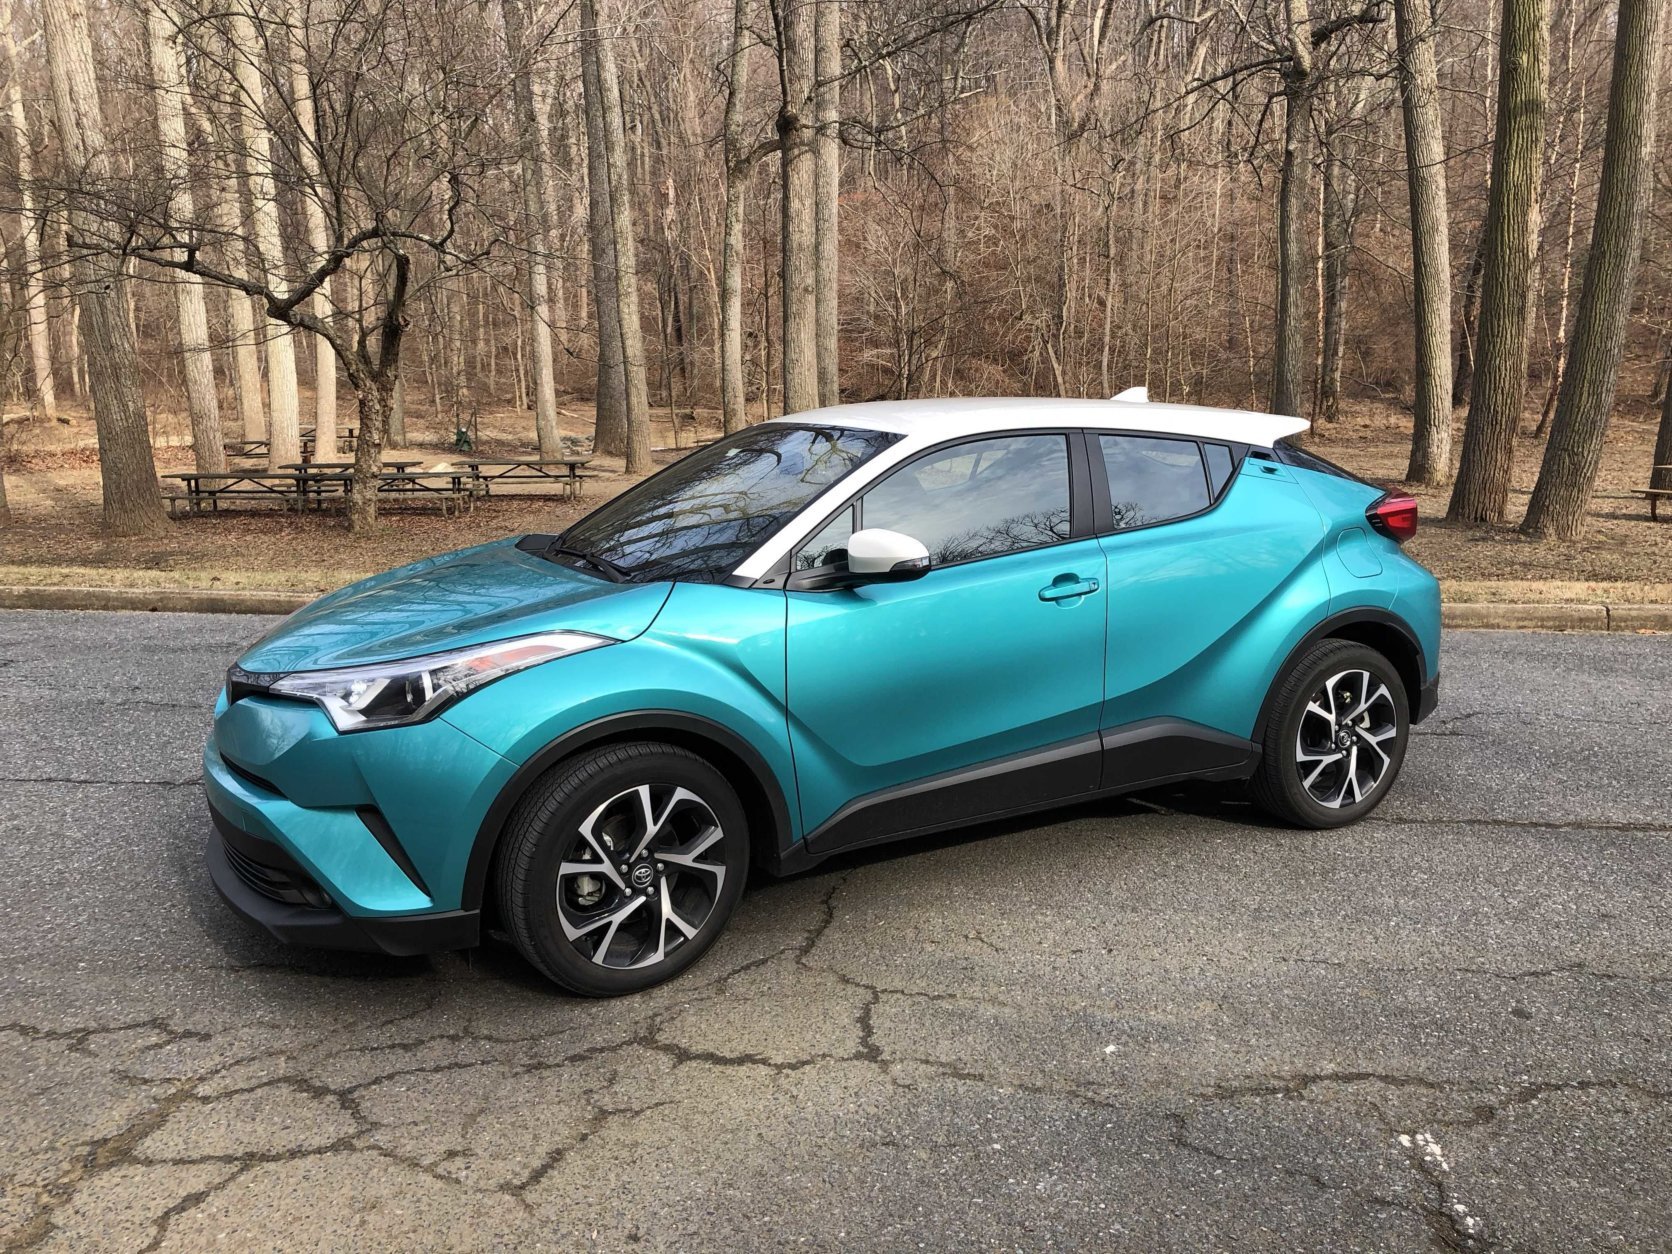 Car Review: Toyota's new subcompact crossover high on style, light